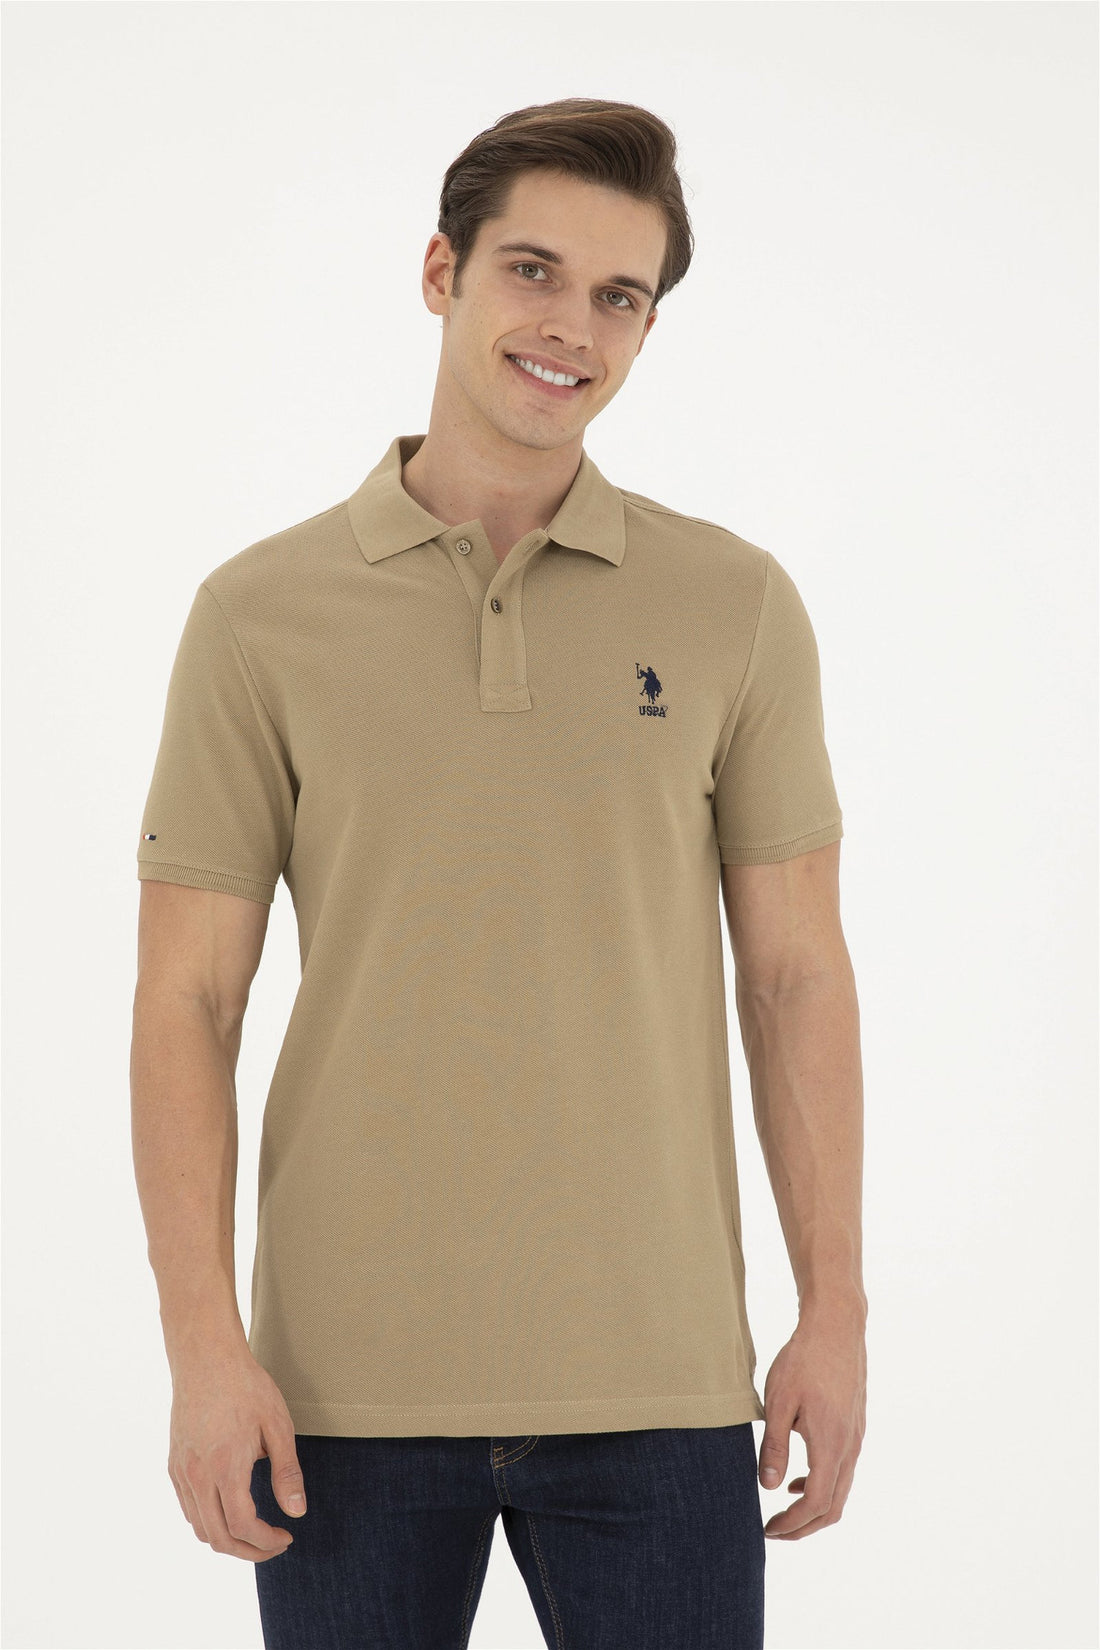 Polo Shirt With Chest Logo_G081SZ0110 1794860_VR027_01